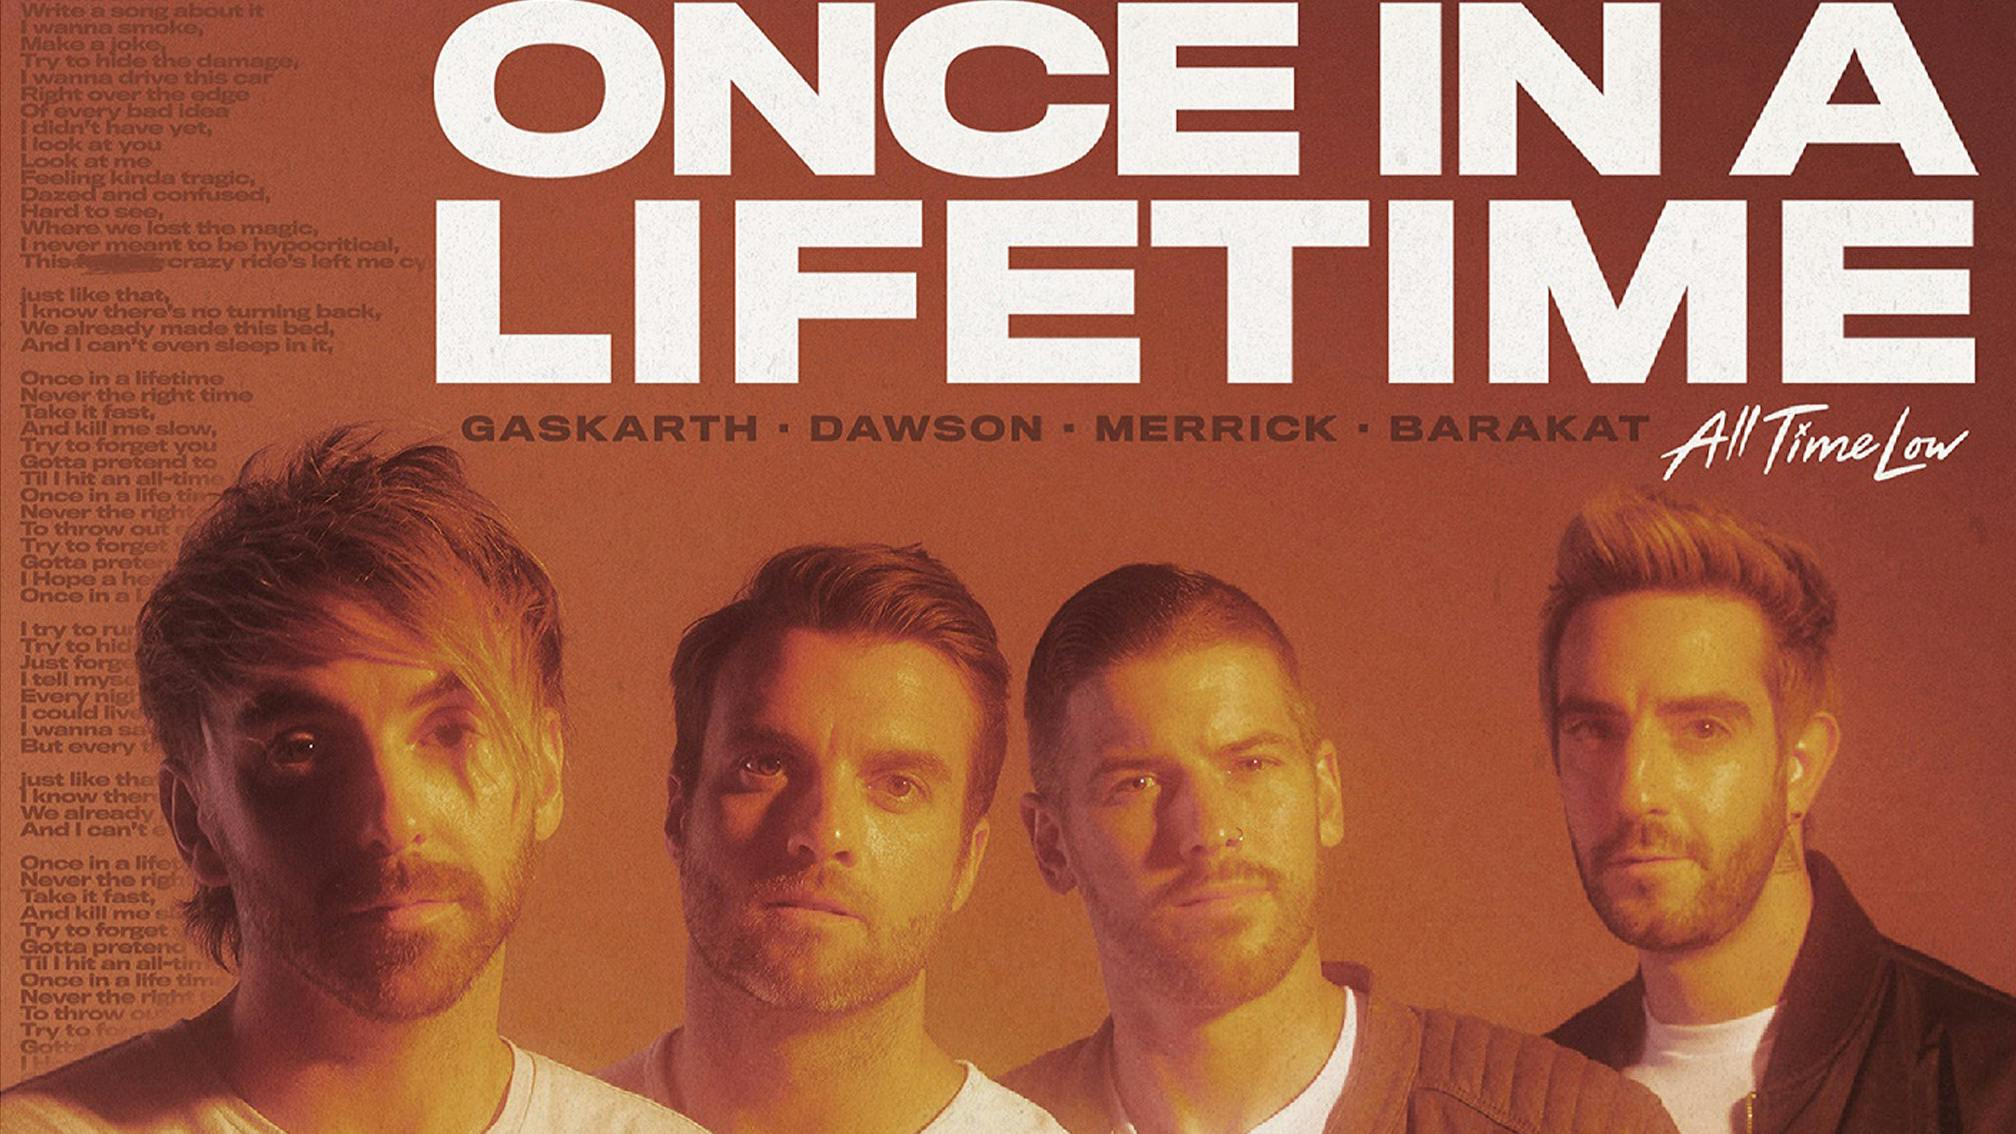 All Time Low announce new single, Once In A Lifetime